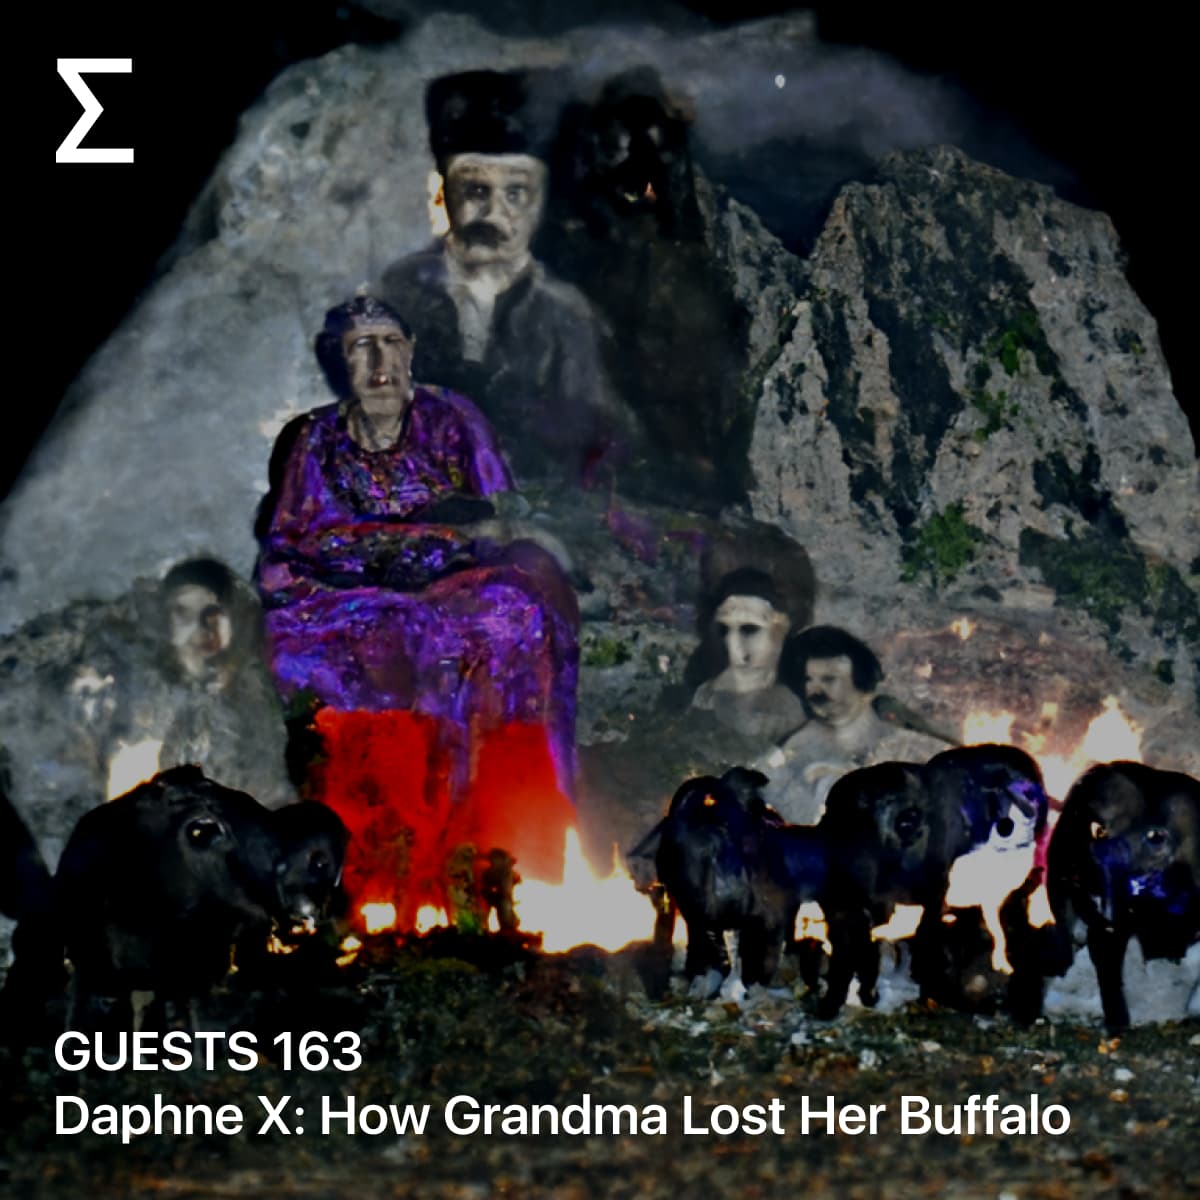 GUESTS 163 – Daphne X: How Grandma Lost Her Buffalo